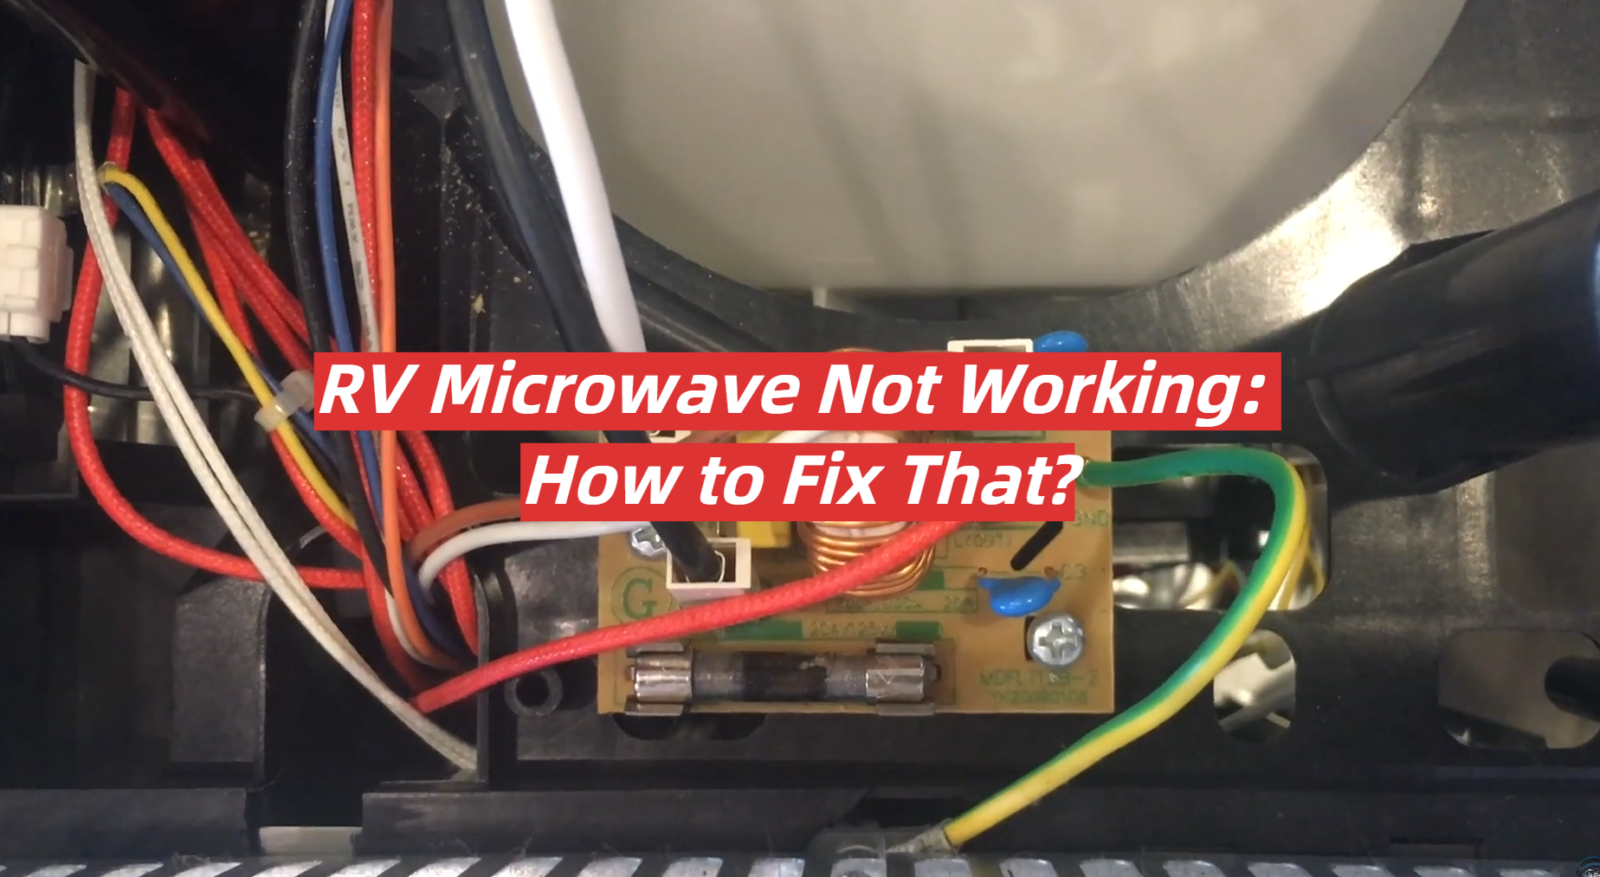 RV Microwave Not Working: How to Fix That?